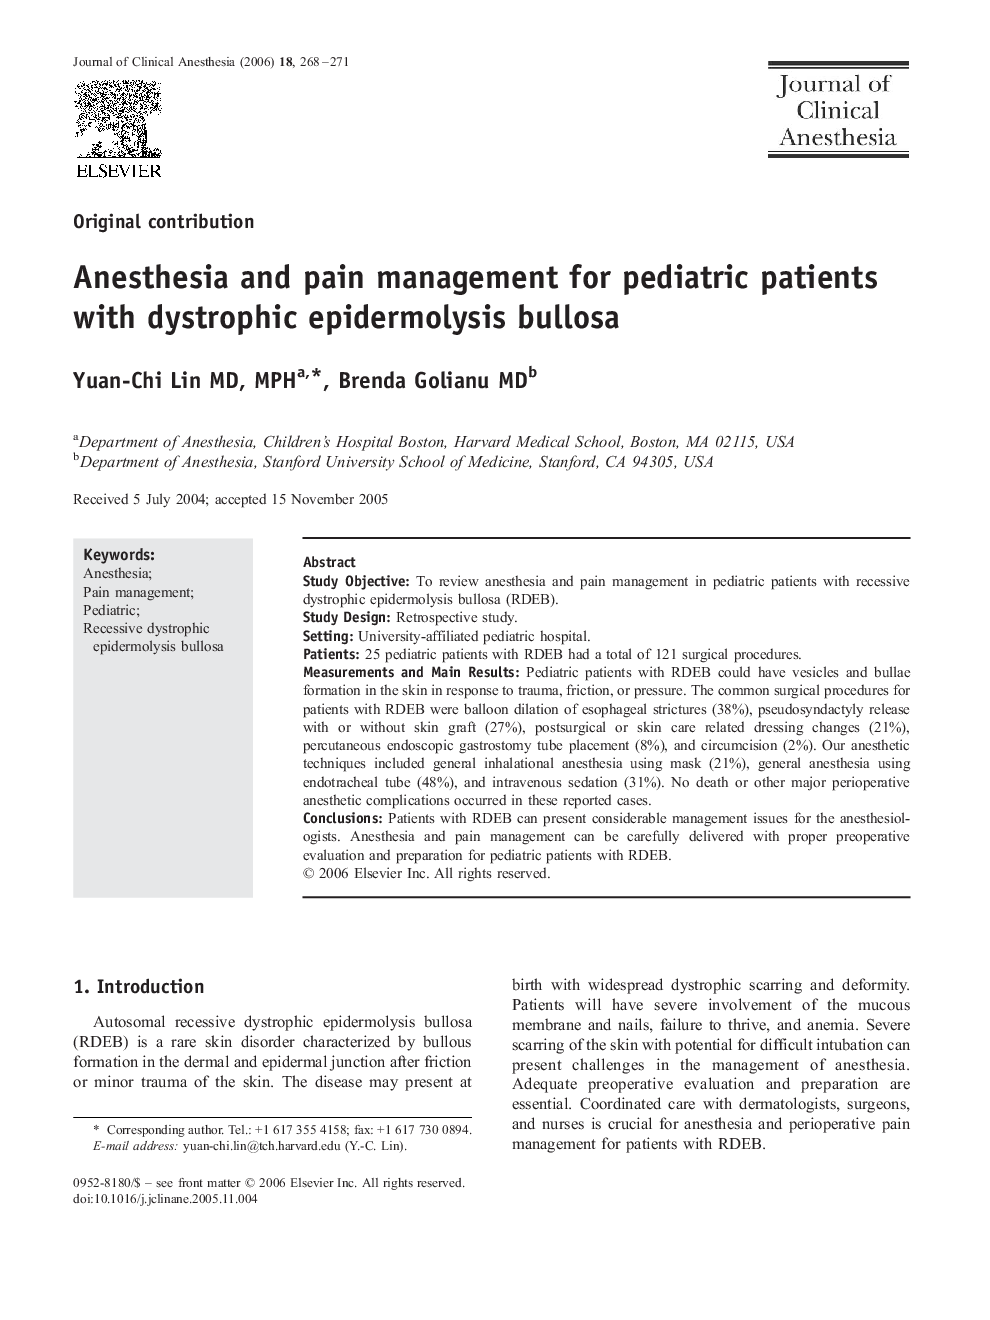 Anesthesia and pain management for pediatric patients with dystrophic epidermolysis bullosa